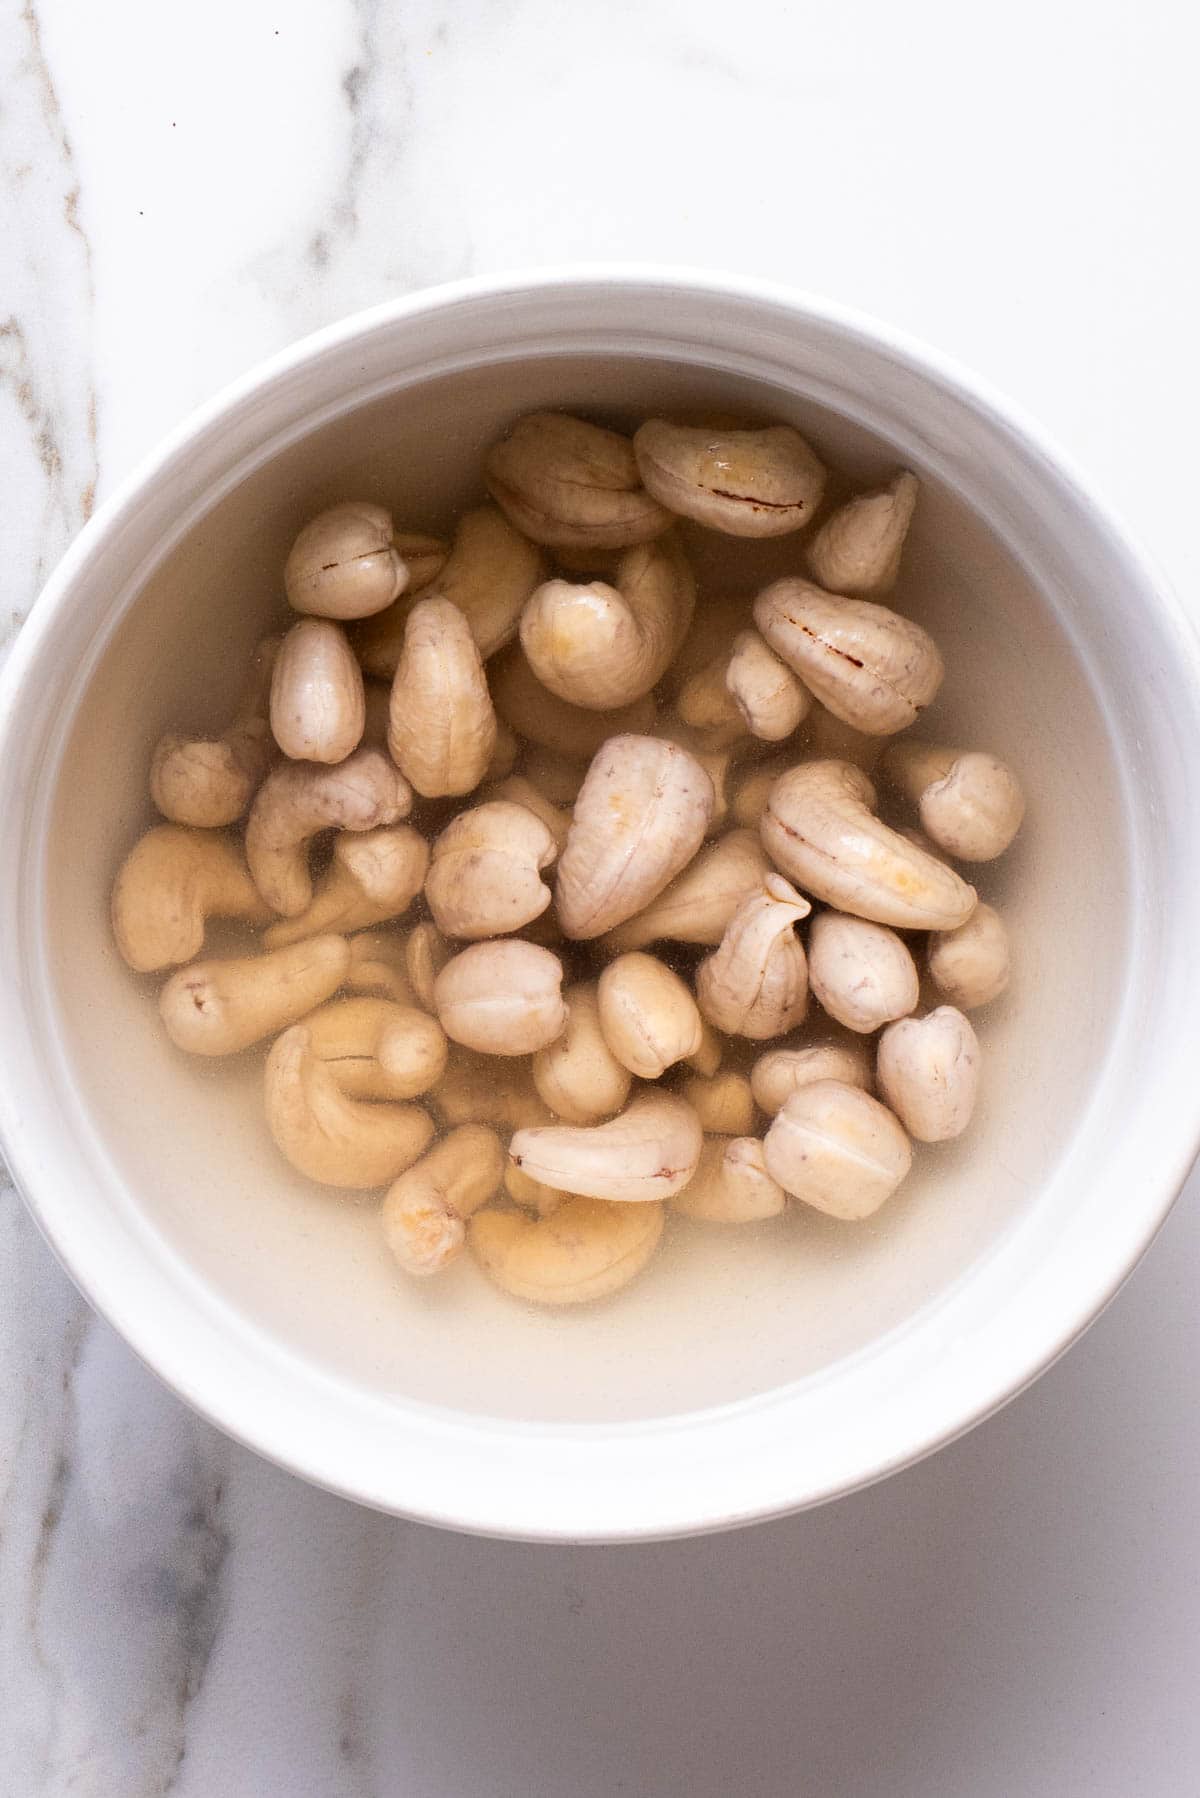 Raw cashews soaking in a bowl of water.